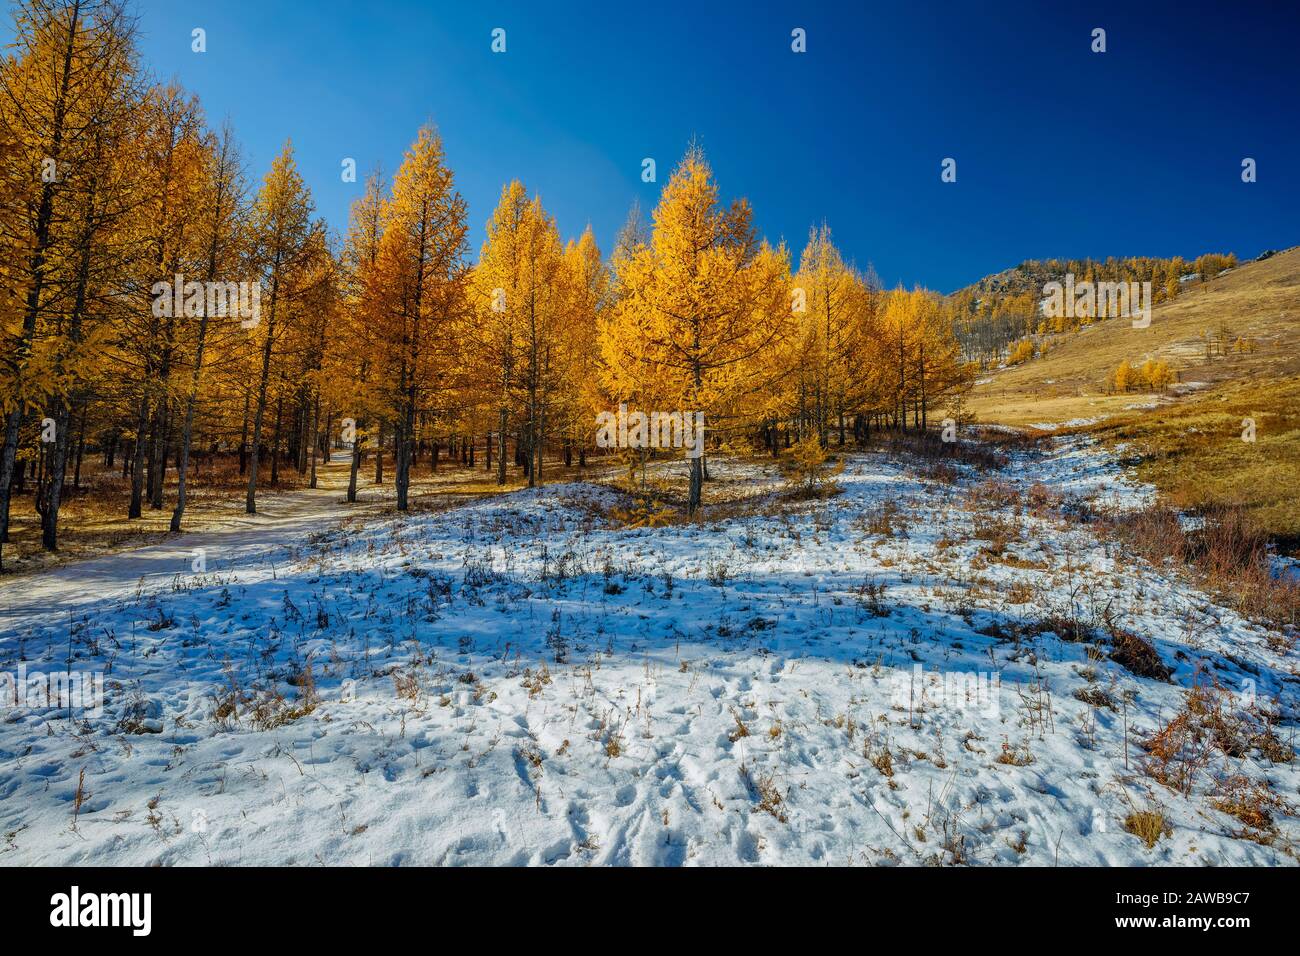 Larch Trees golden needles contrast the clear blue skies and white snow on a mountain in Mongolia Stock Photo